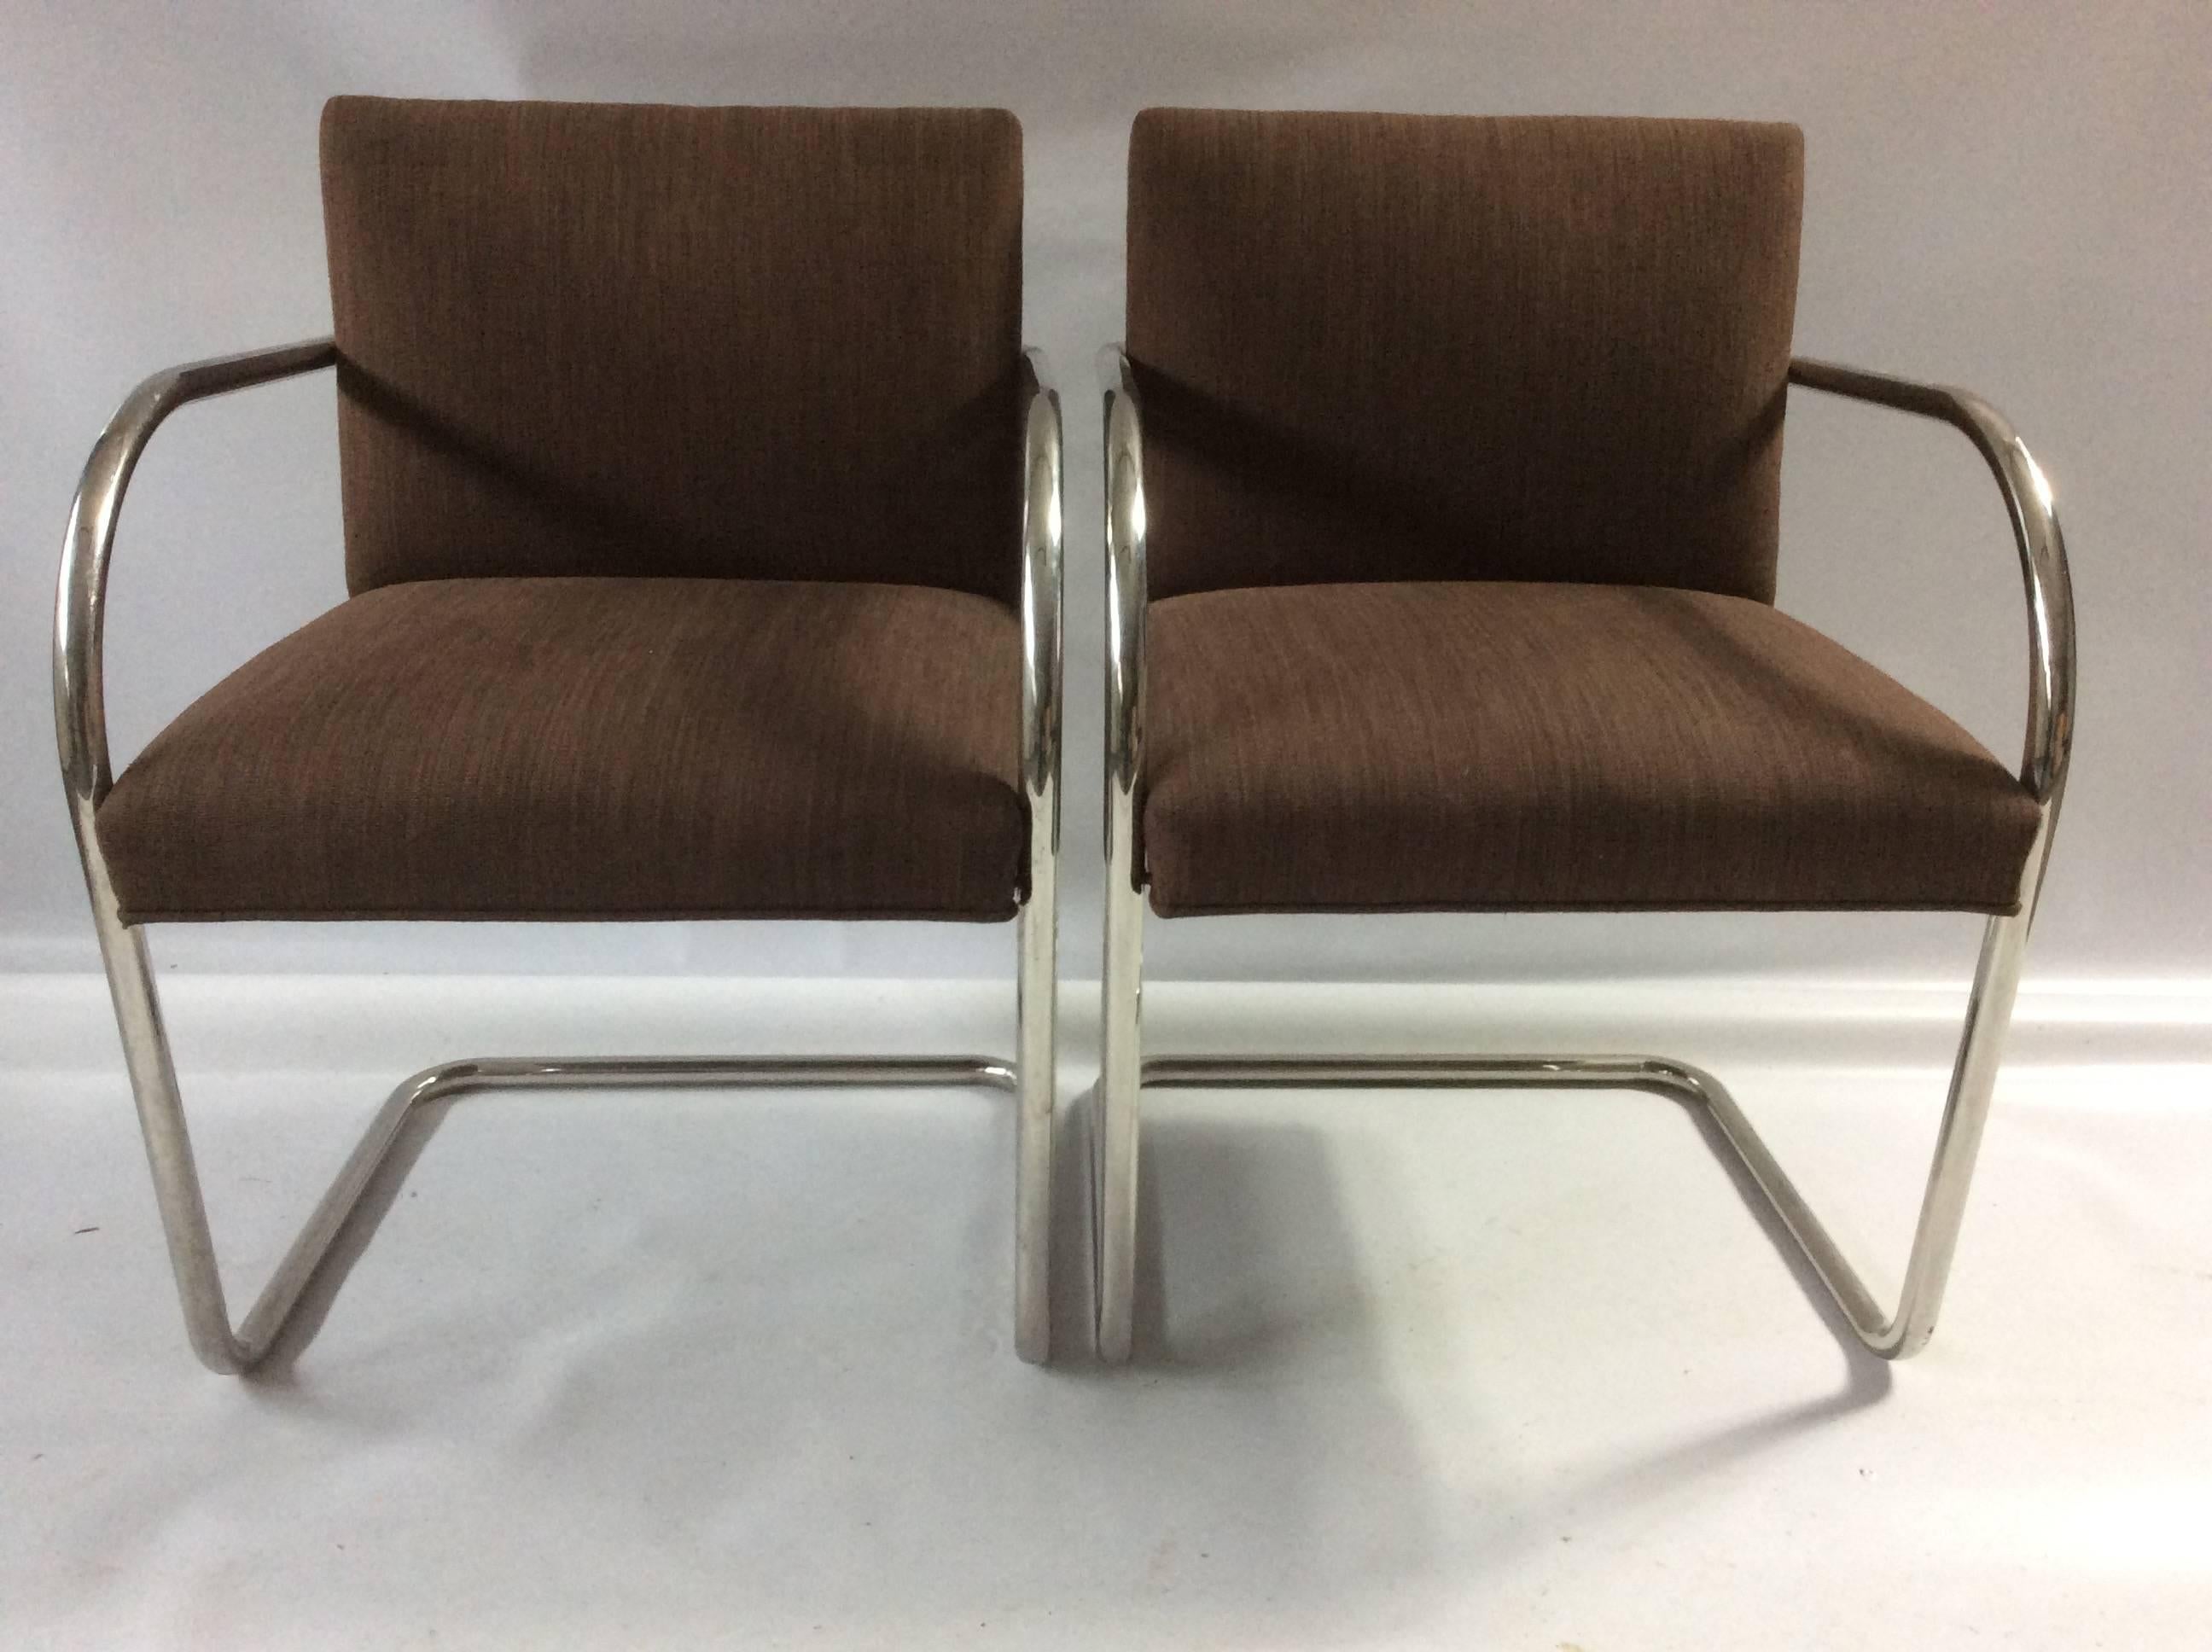 Designed in 1930 for the Tugendhat House in Brno, Czechoslovakia, the Brno chair is a design icon. The cantilevered frame is a single piece of tubular chromed steel. Seats are reupholstered and in nice condition, but not brand new.